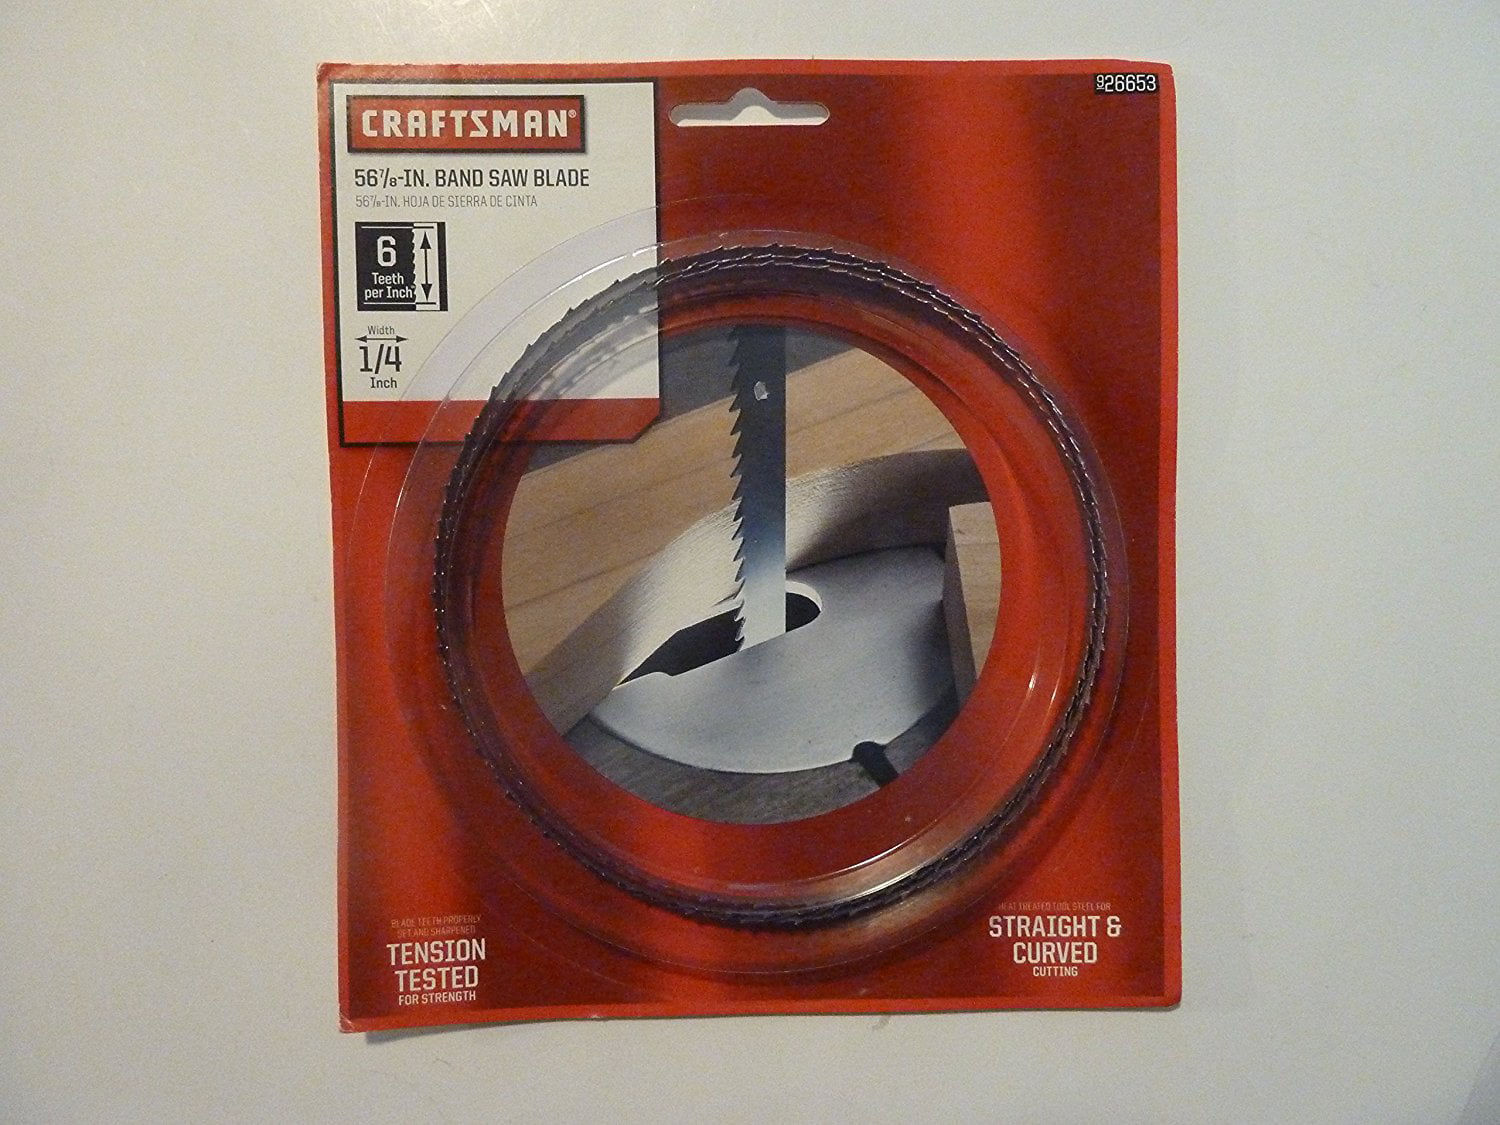 1/4 x 56-7/8 in. Band Saw Blade, 6TPI, 26653, NEW - Craftsman 1/4 x 56